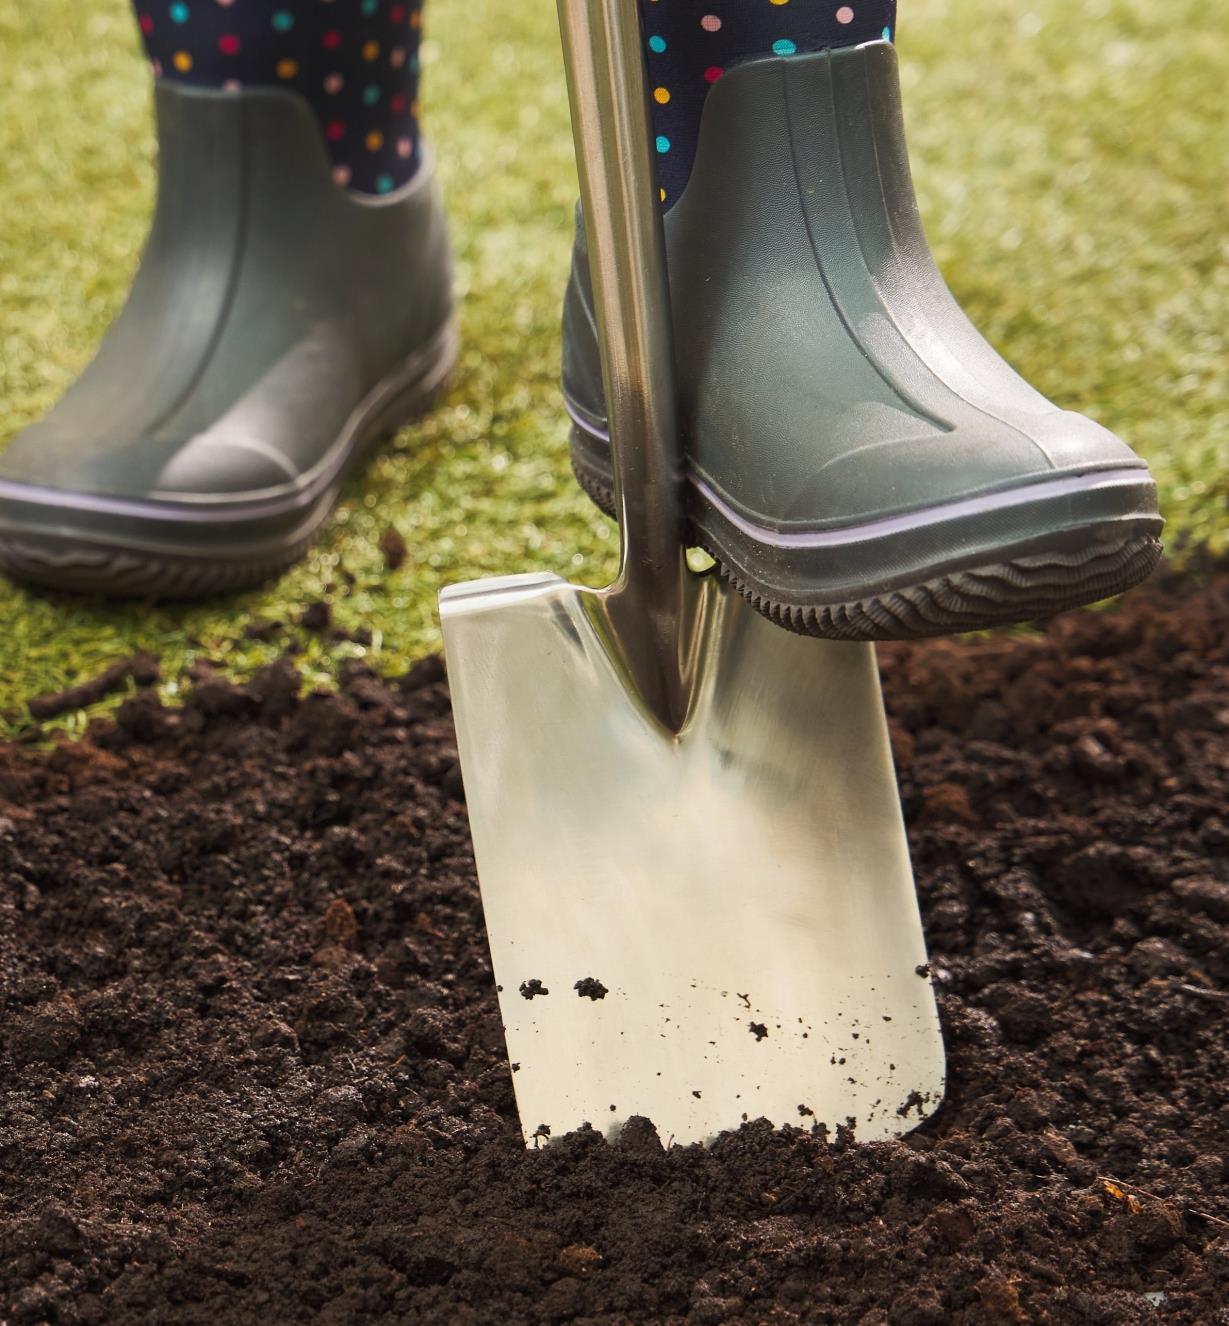 A foot wearing a rubber boot pushes the children’s digging spade into soil 